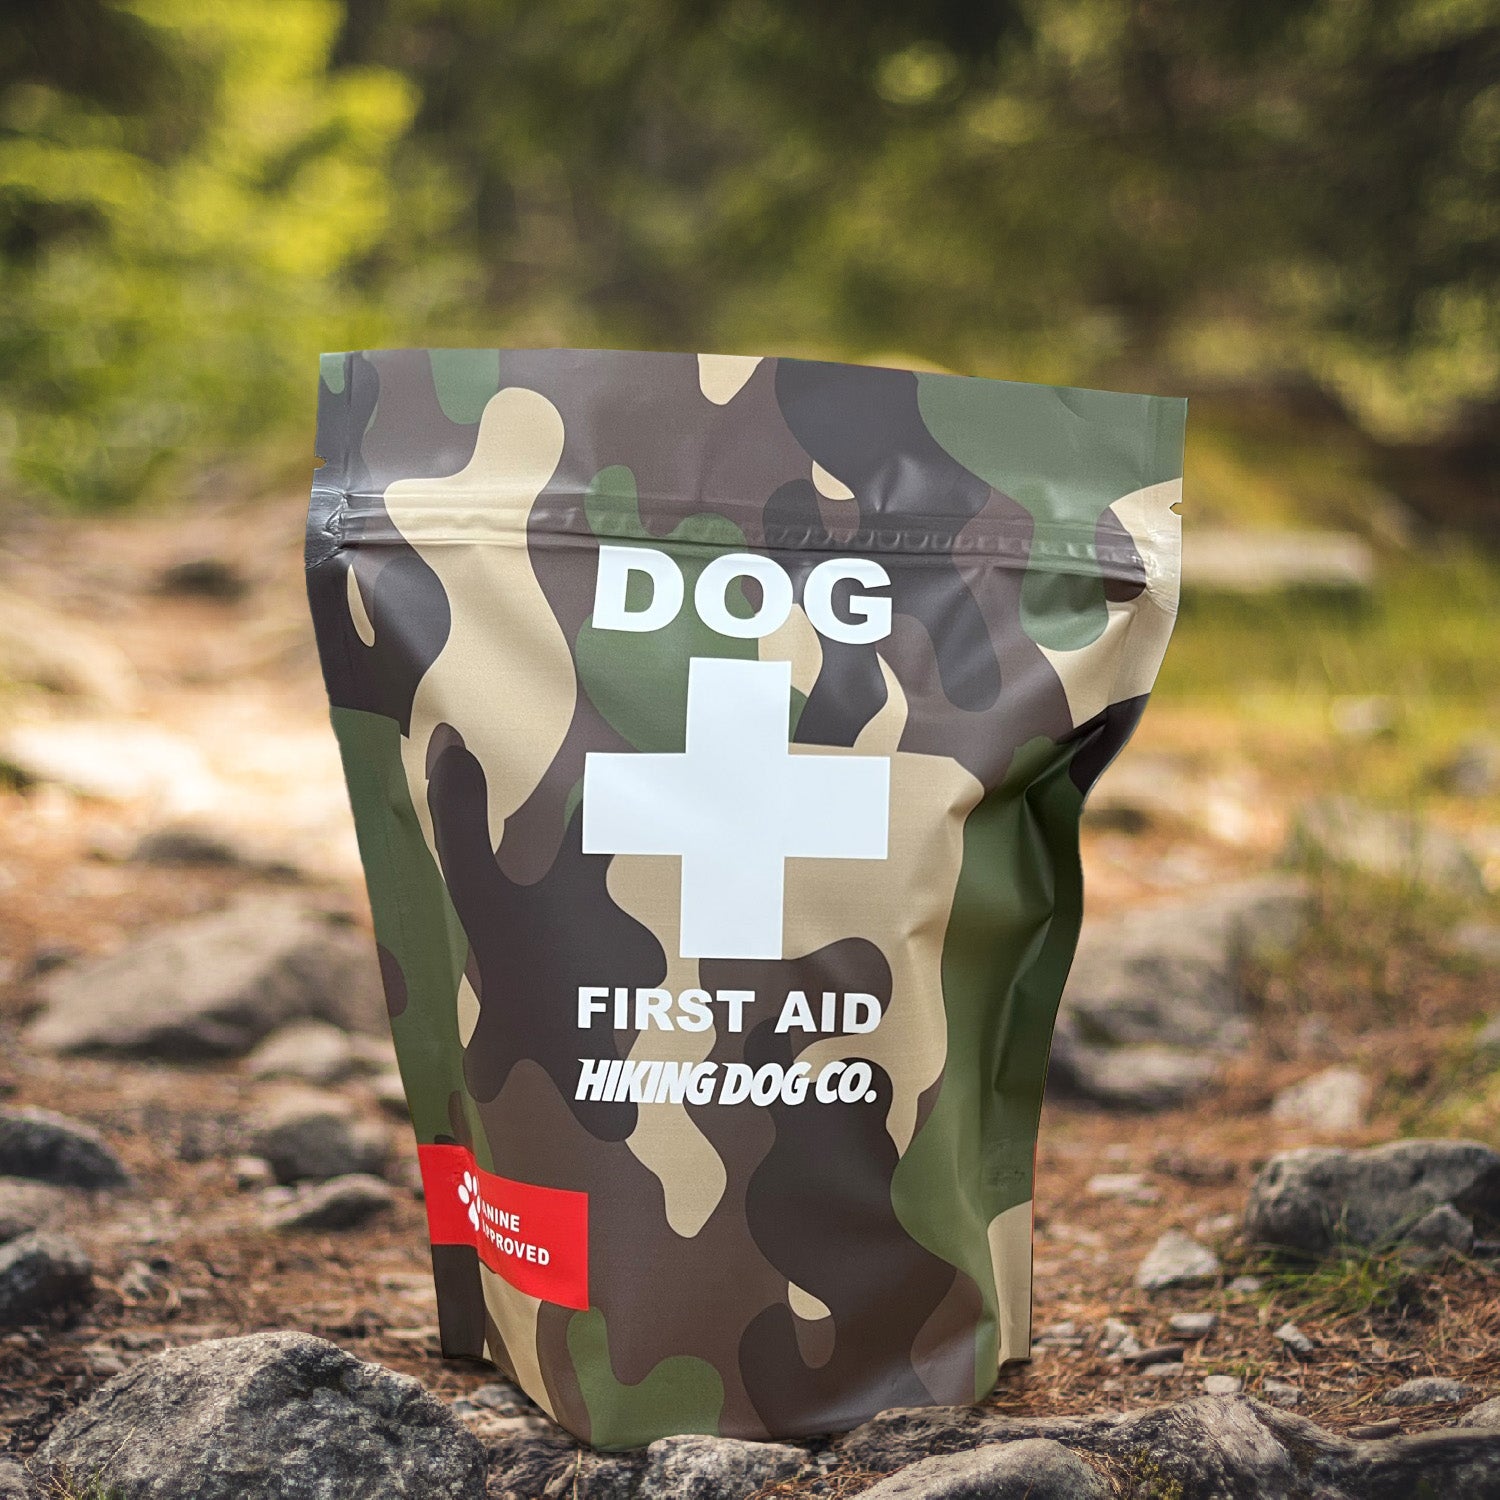 Hiking Dog Co's Dog First Aid Kit in camo resealable pouch. Contents are protected from the elements in the pouch. 